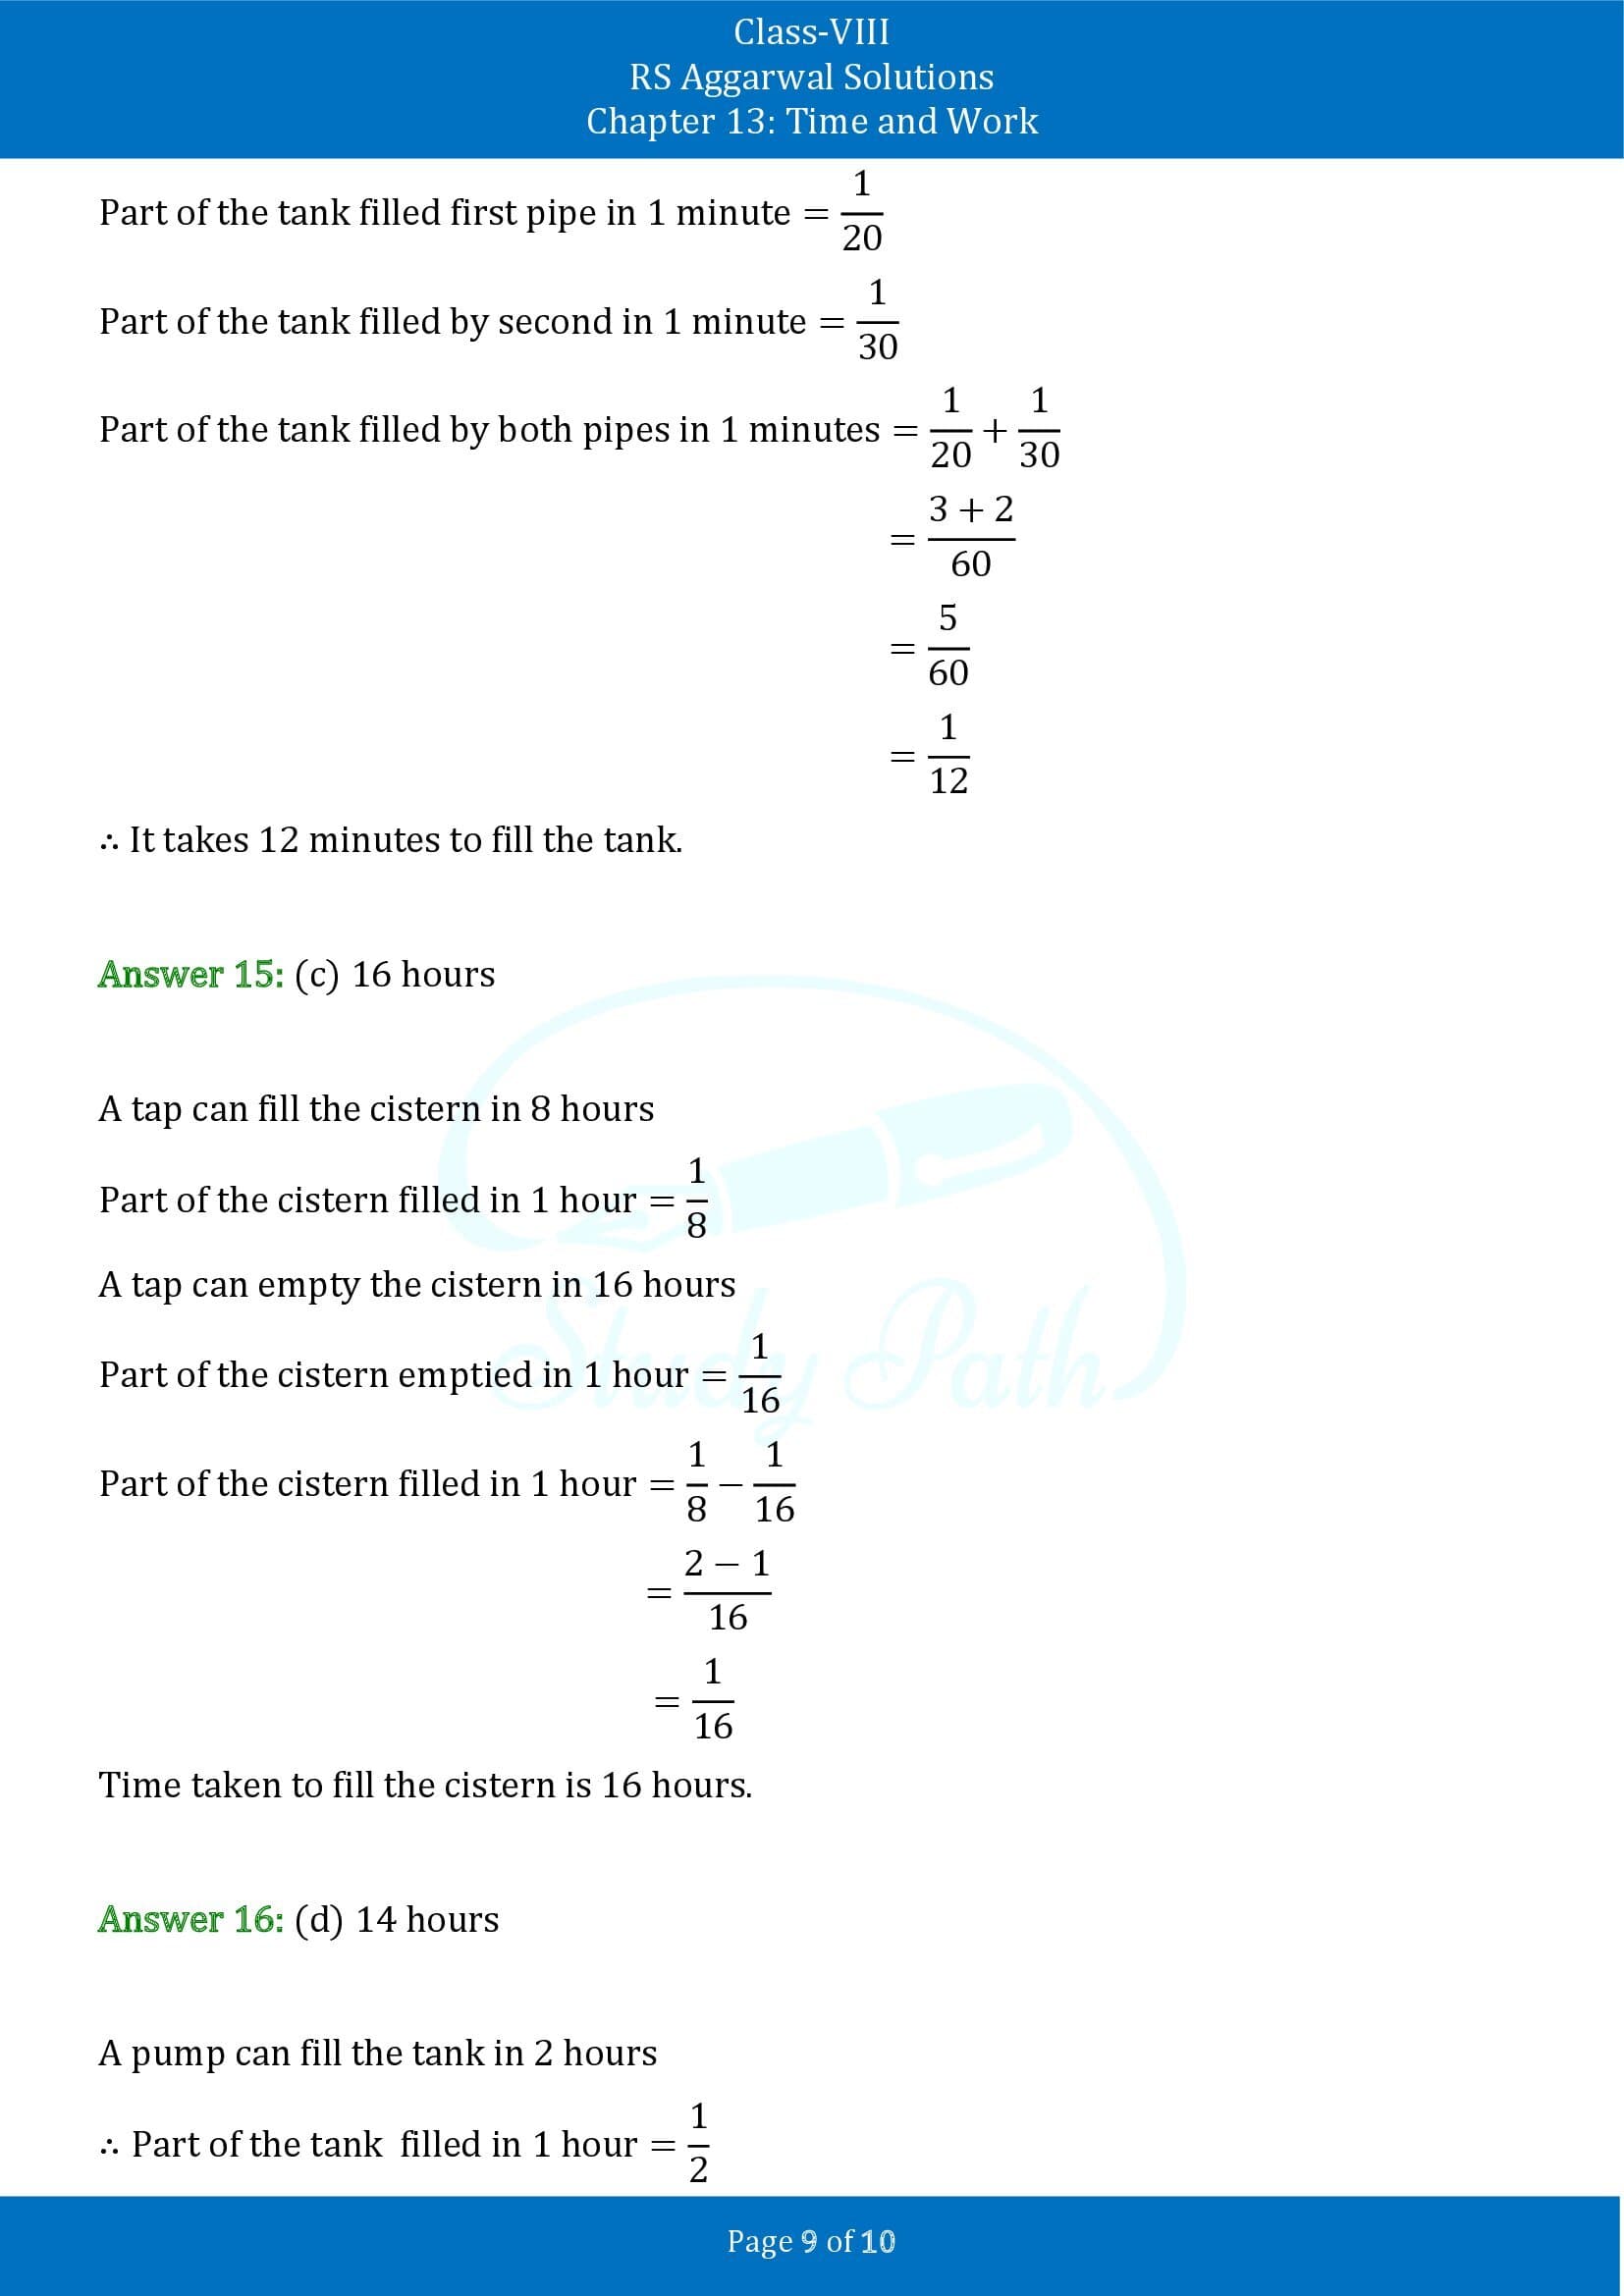 RS Aggarwal Solutions Class 8 Chapter 13 Time and Work Exercise 13B MCQs 00009